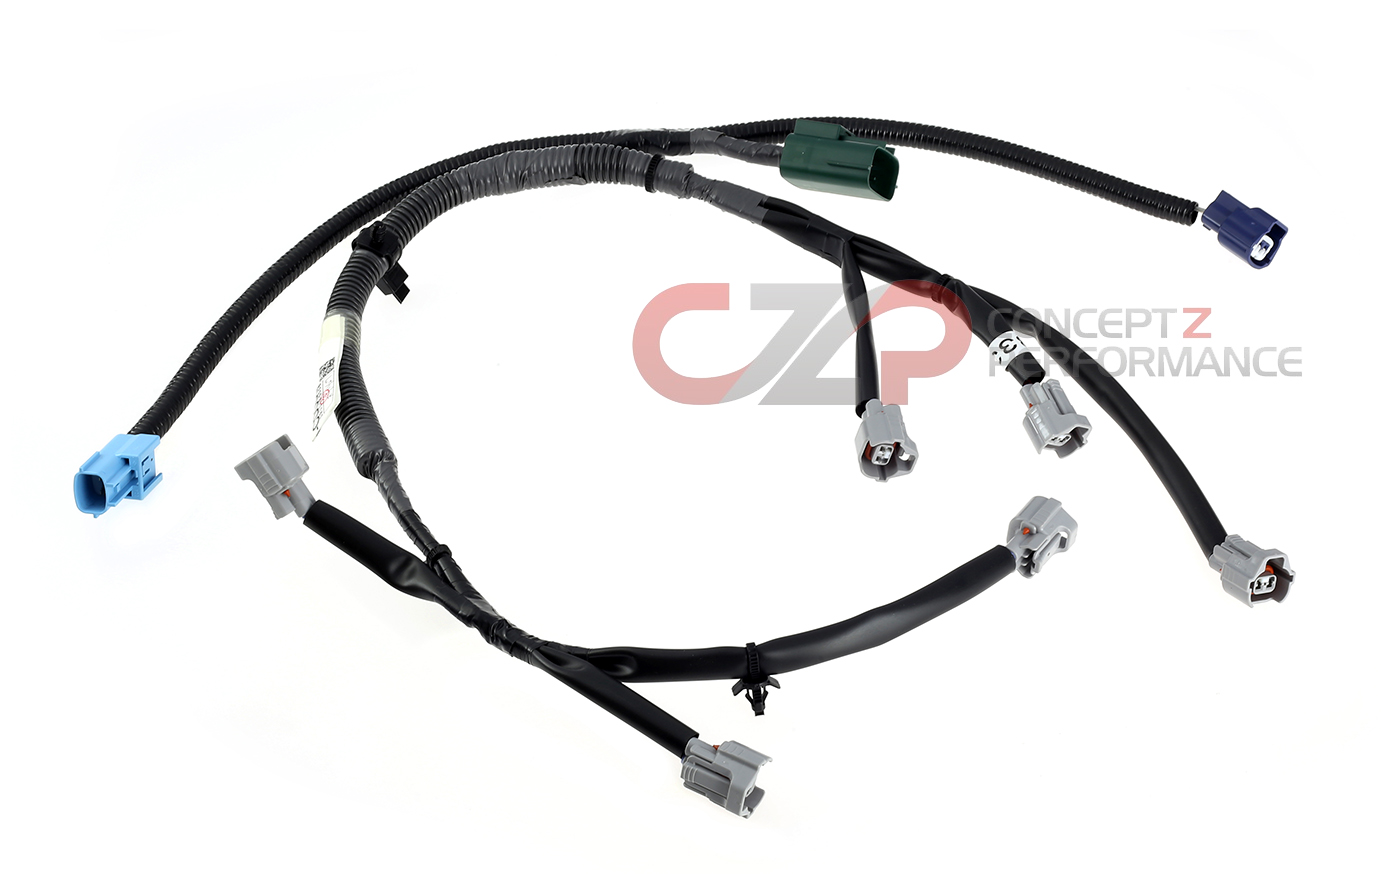 Nissan OEM 24079-CD000 Fuel Injector and Knock Sensor Harness, Non-RevUp - Nissan 350Z 03-06 Z33